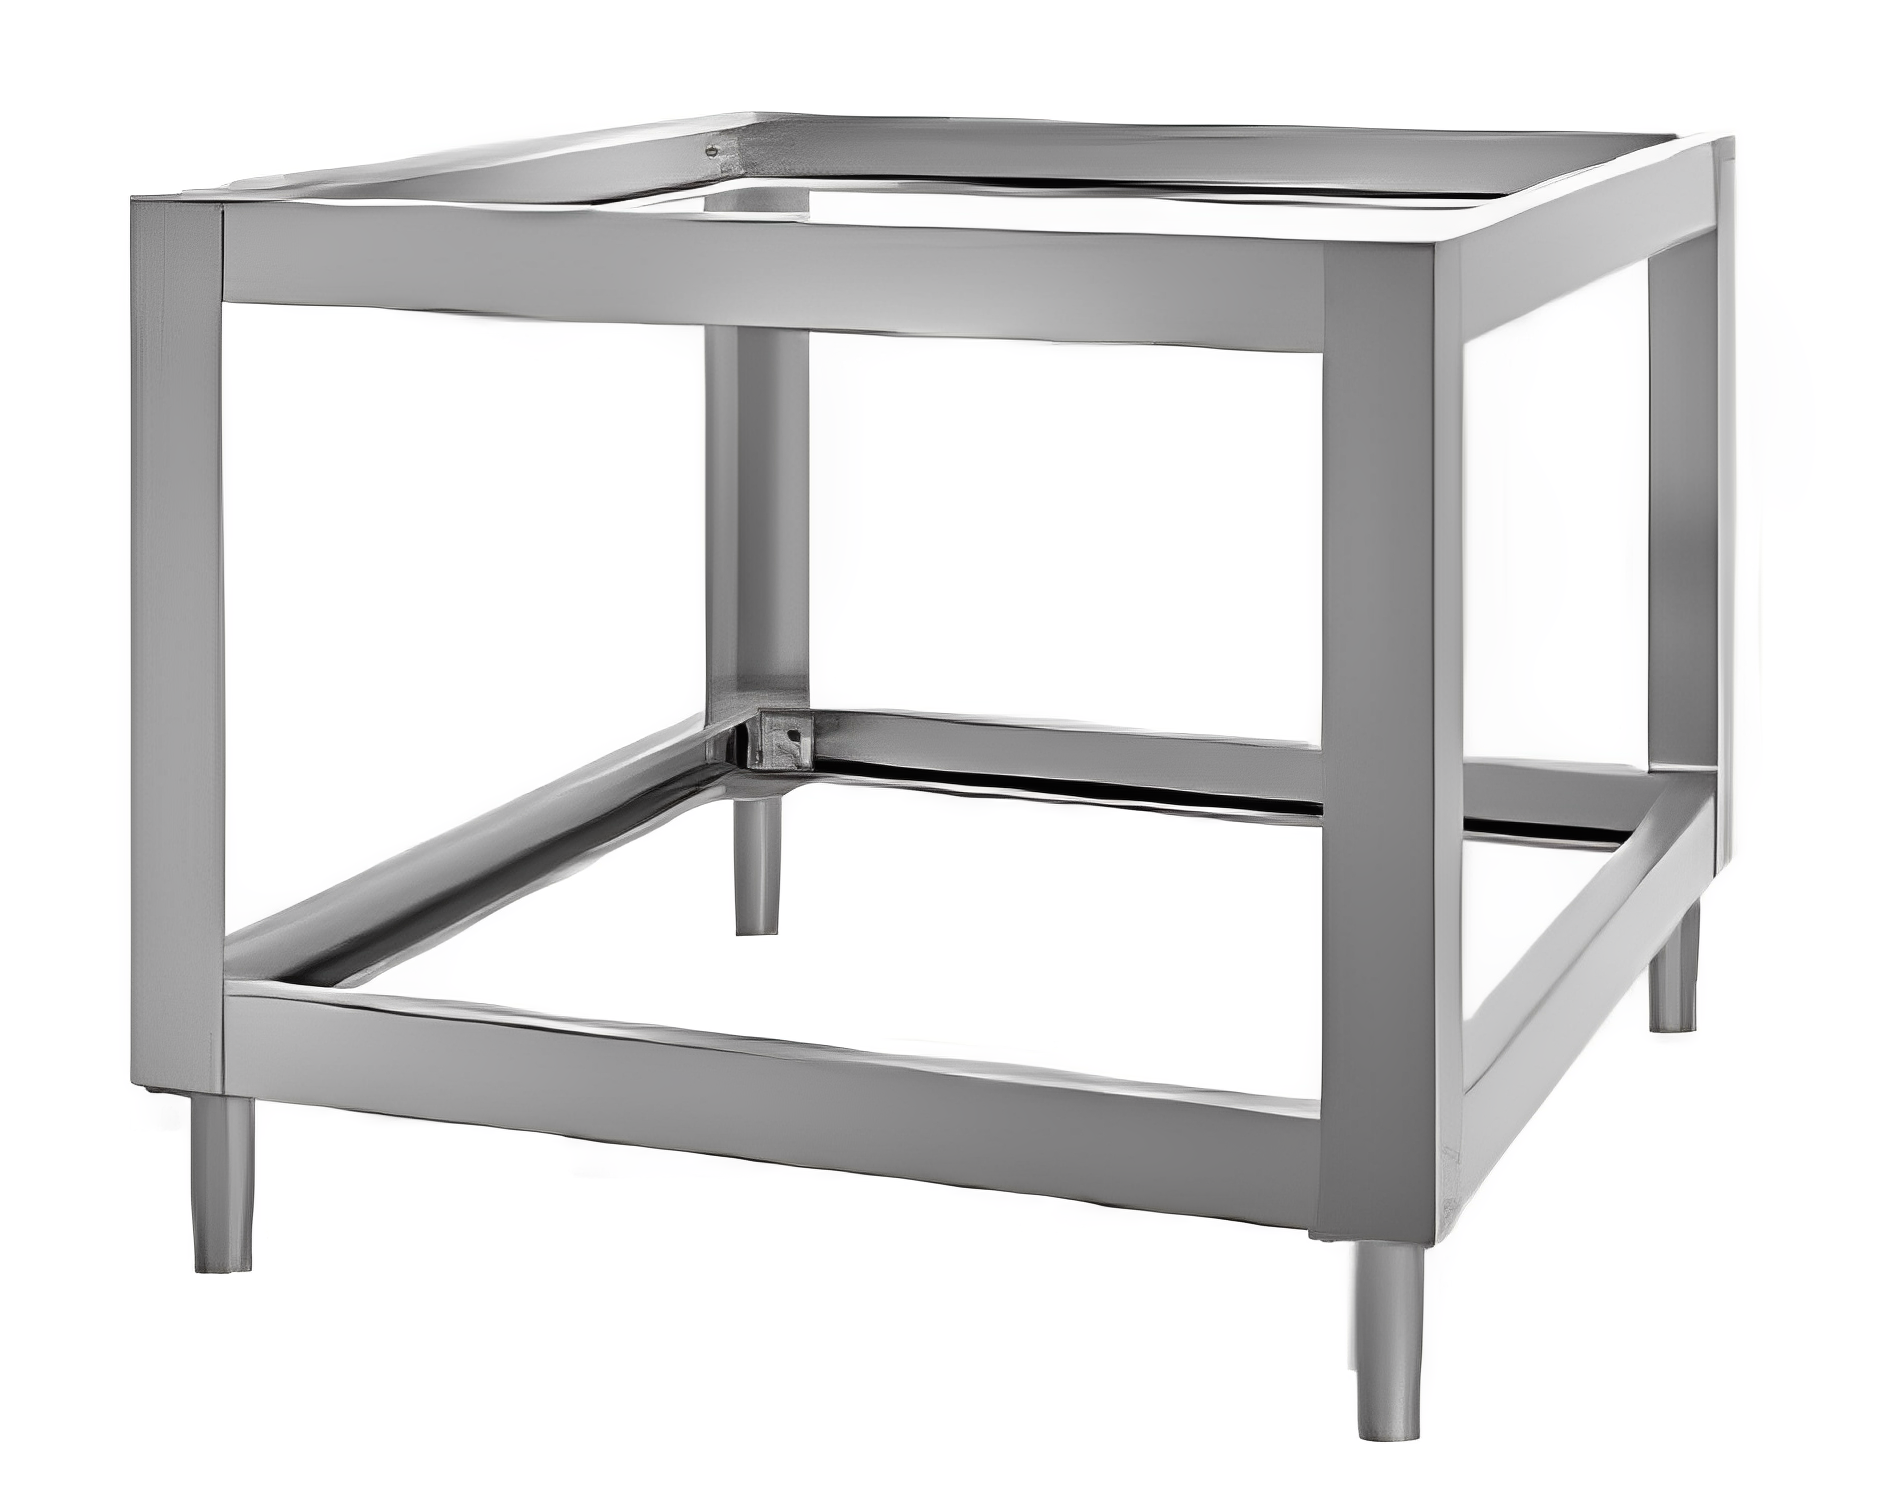 PIZZAGROUP Entry Max S8 Stands in stainless steel